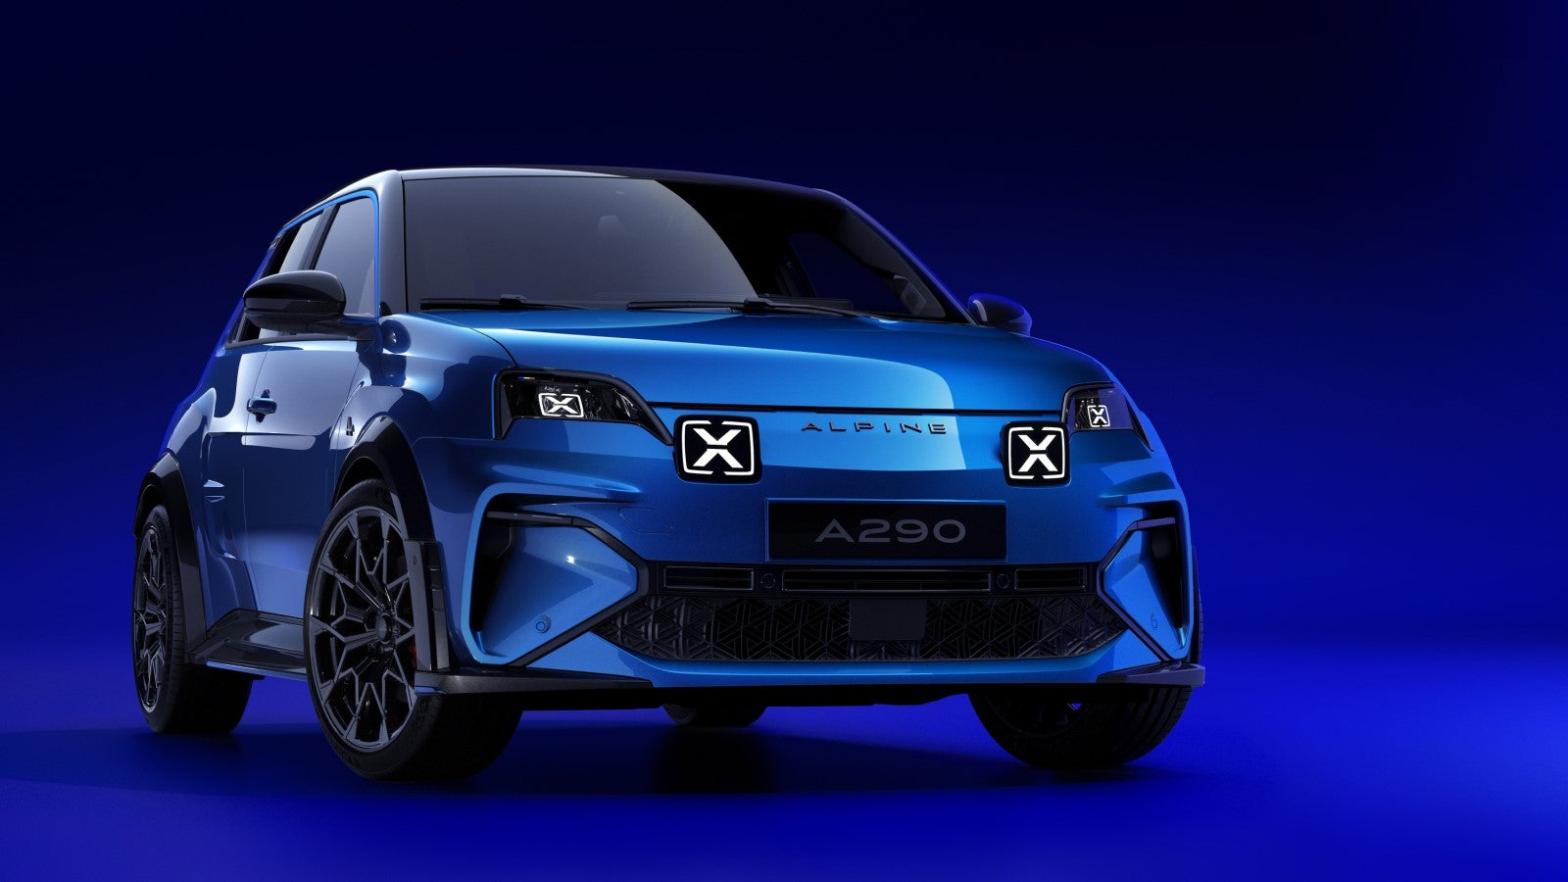 Alpine’s A290 Electric Hot Hatch Will Teach You to Drive Better